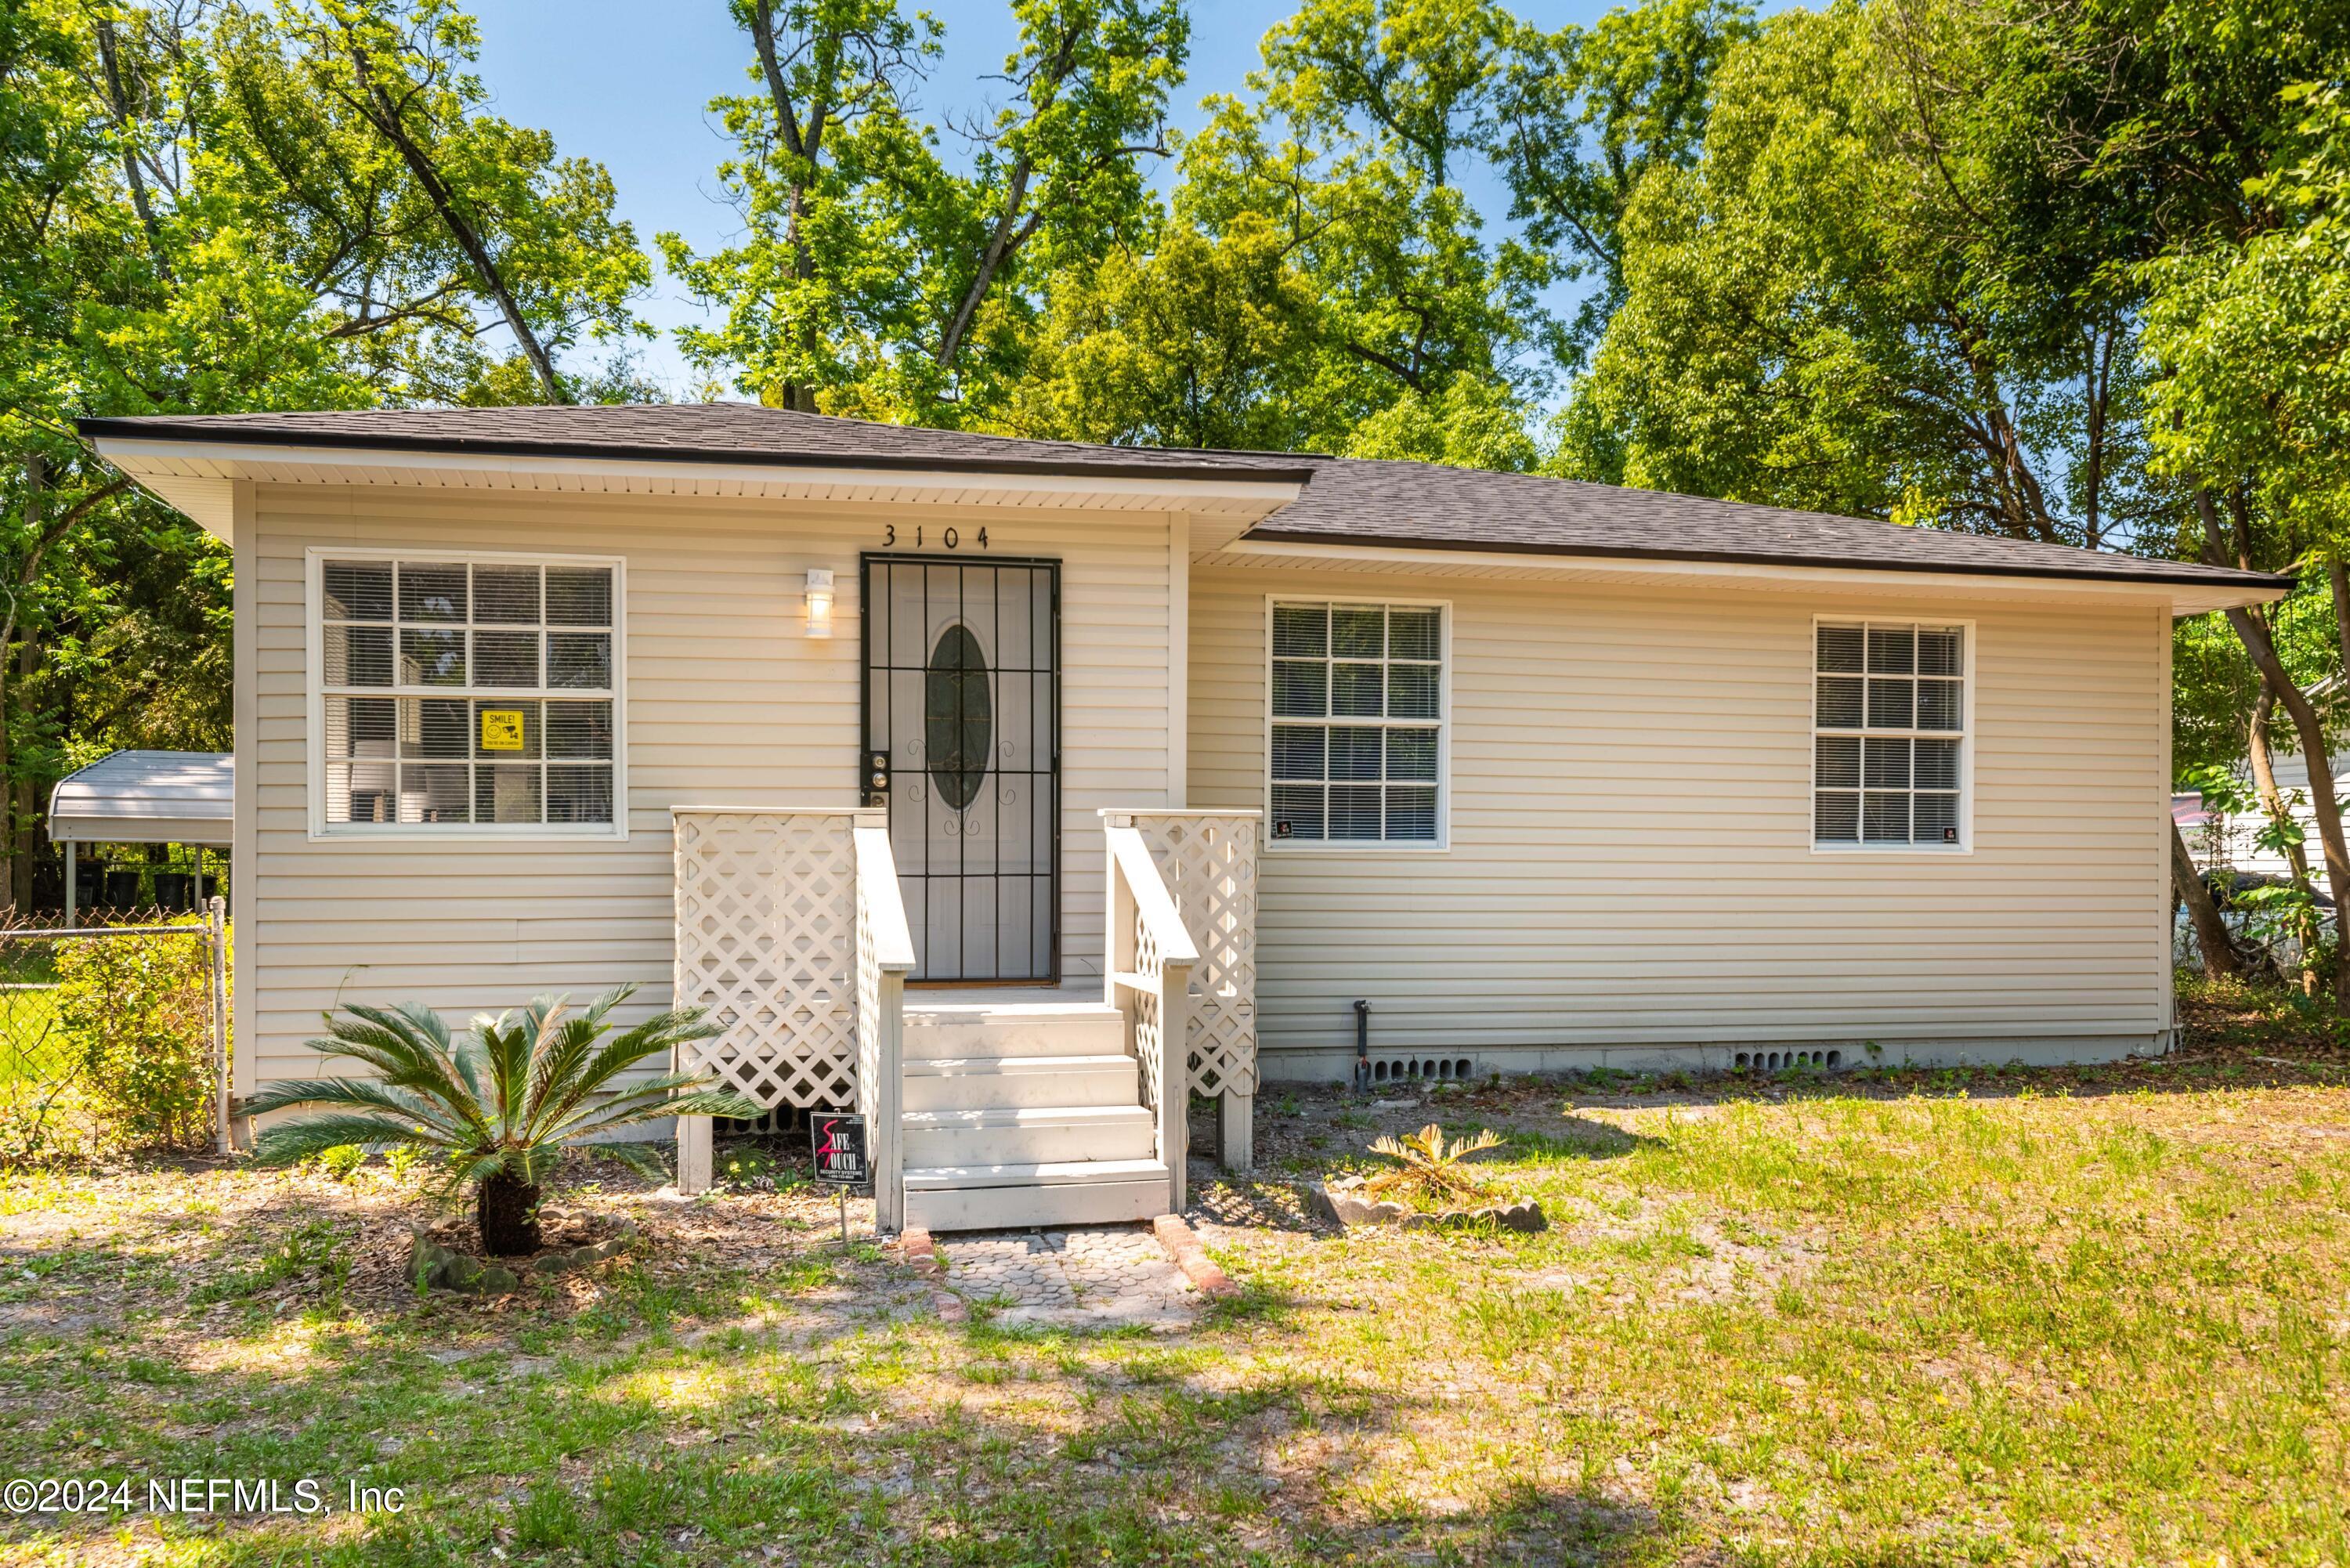 Jacksonville, FL home for sale located at 3104 W 16th Street, Jacksonville, FL 32254